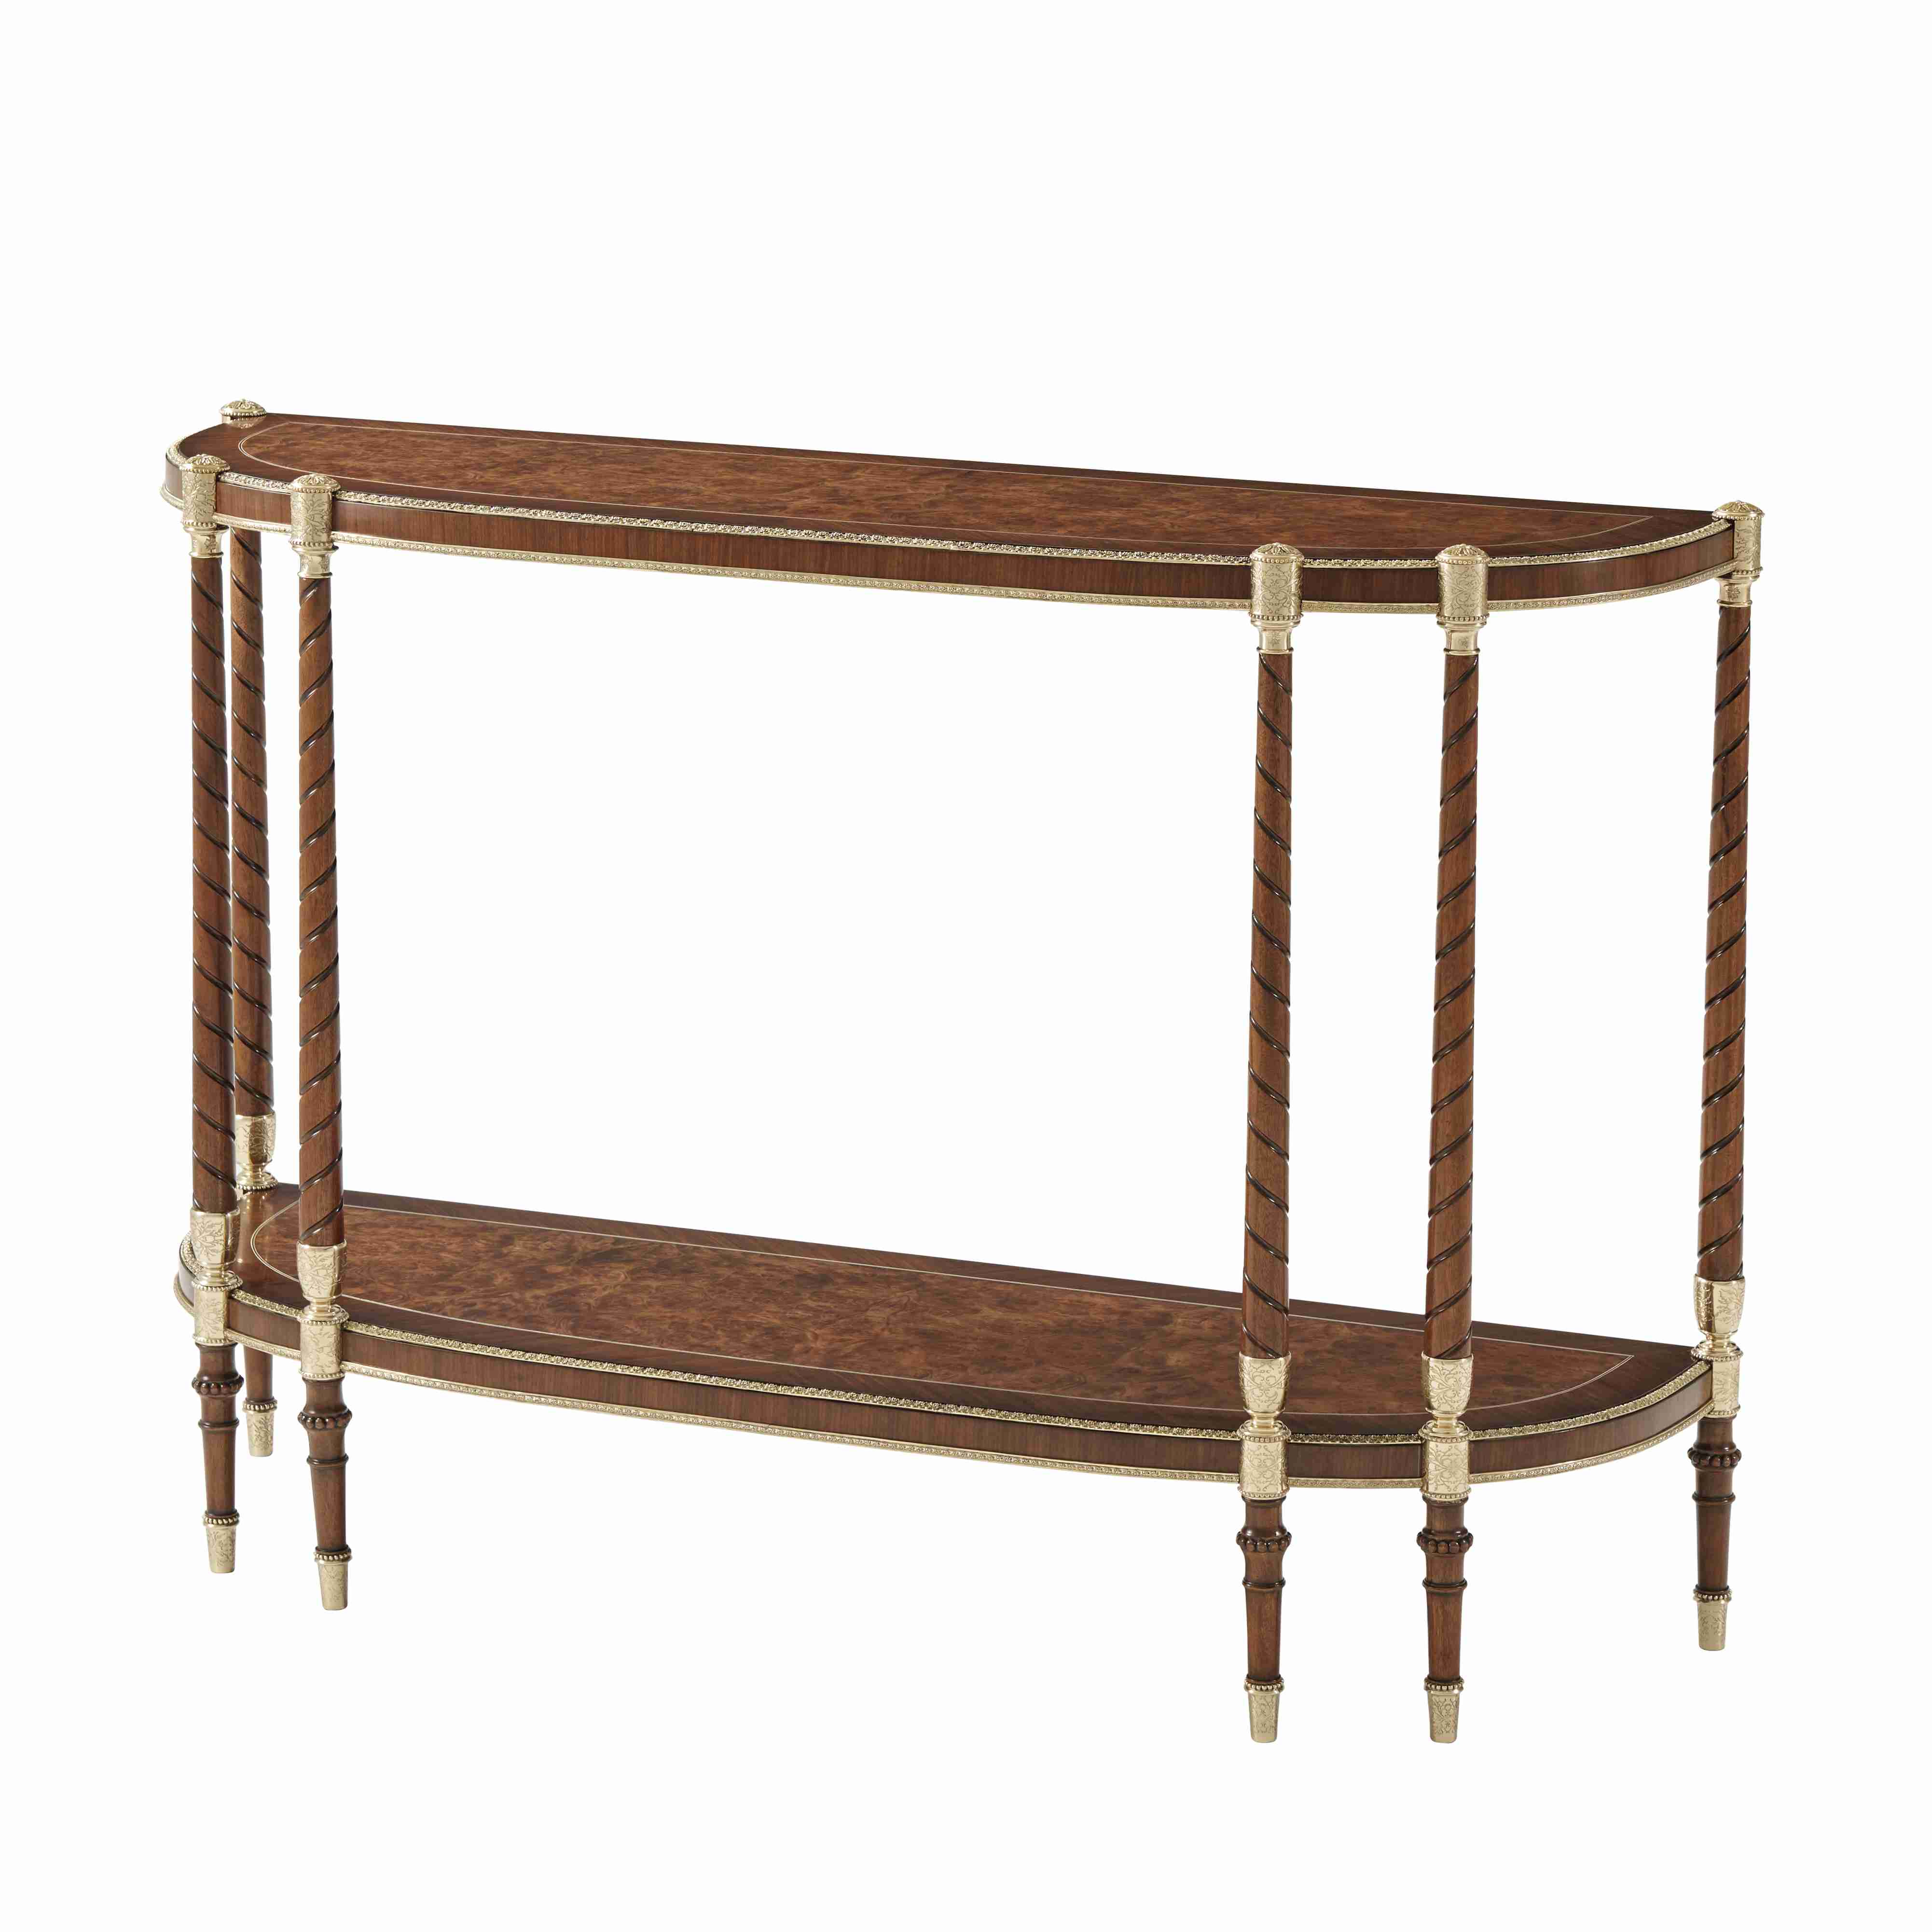 THE TIMOTHY CONSOLE TABLE